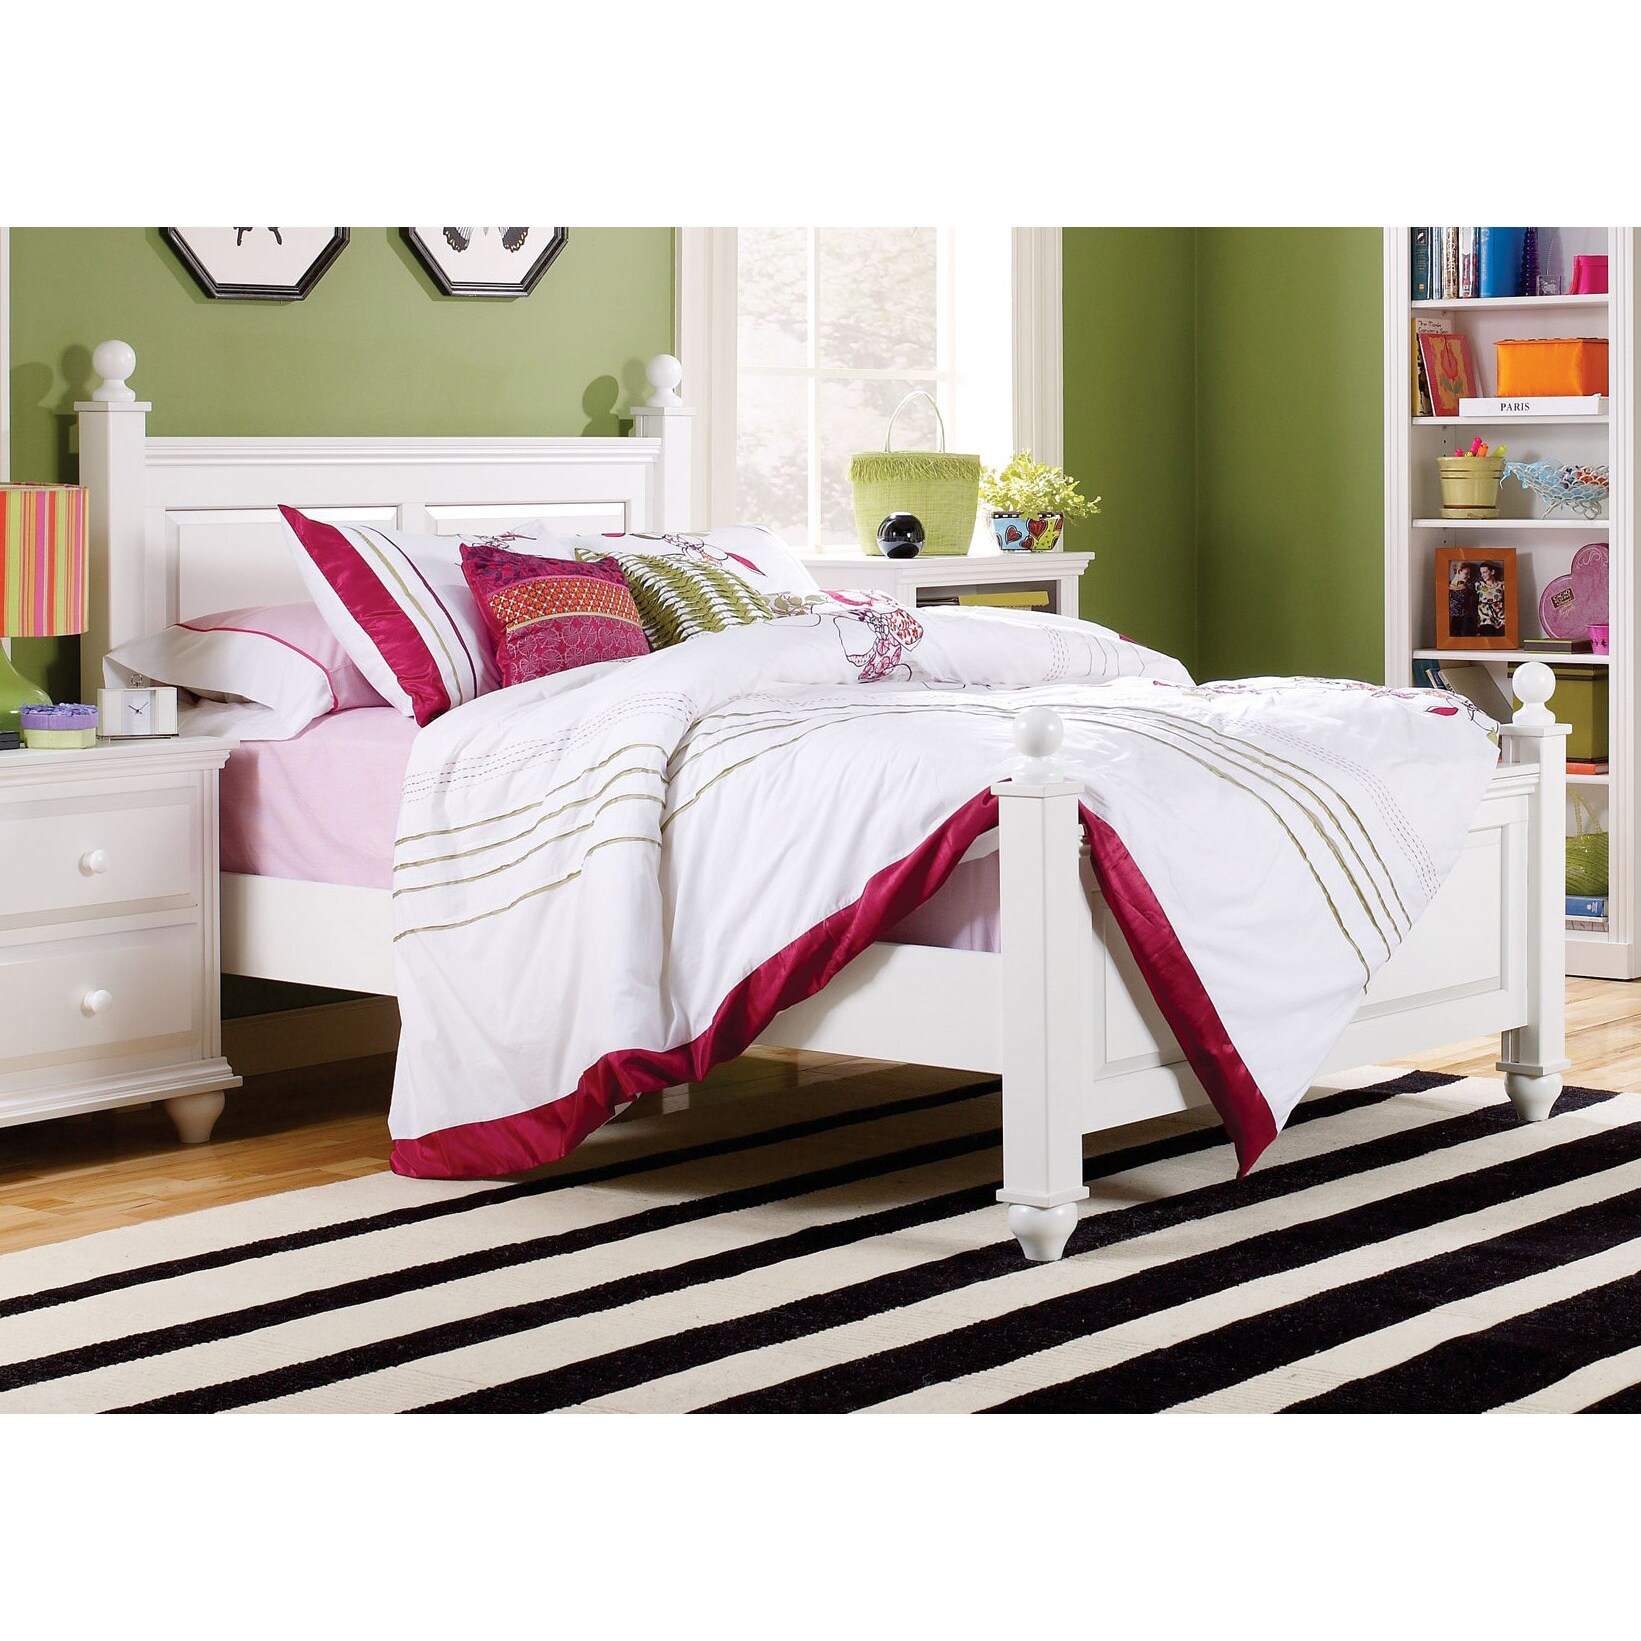 childrens four poster bed